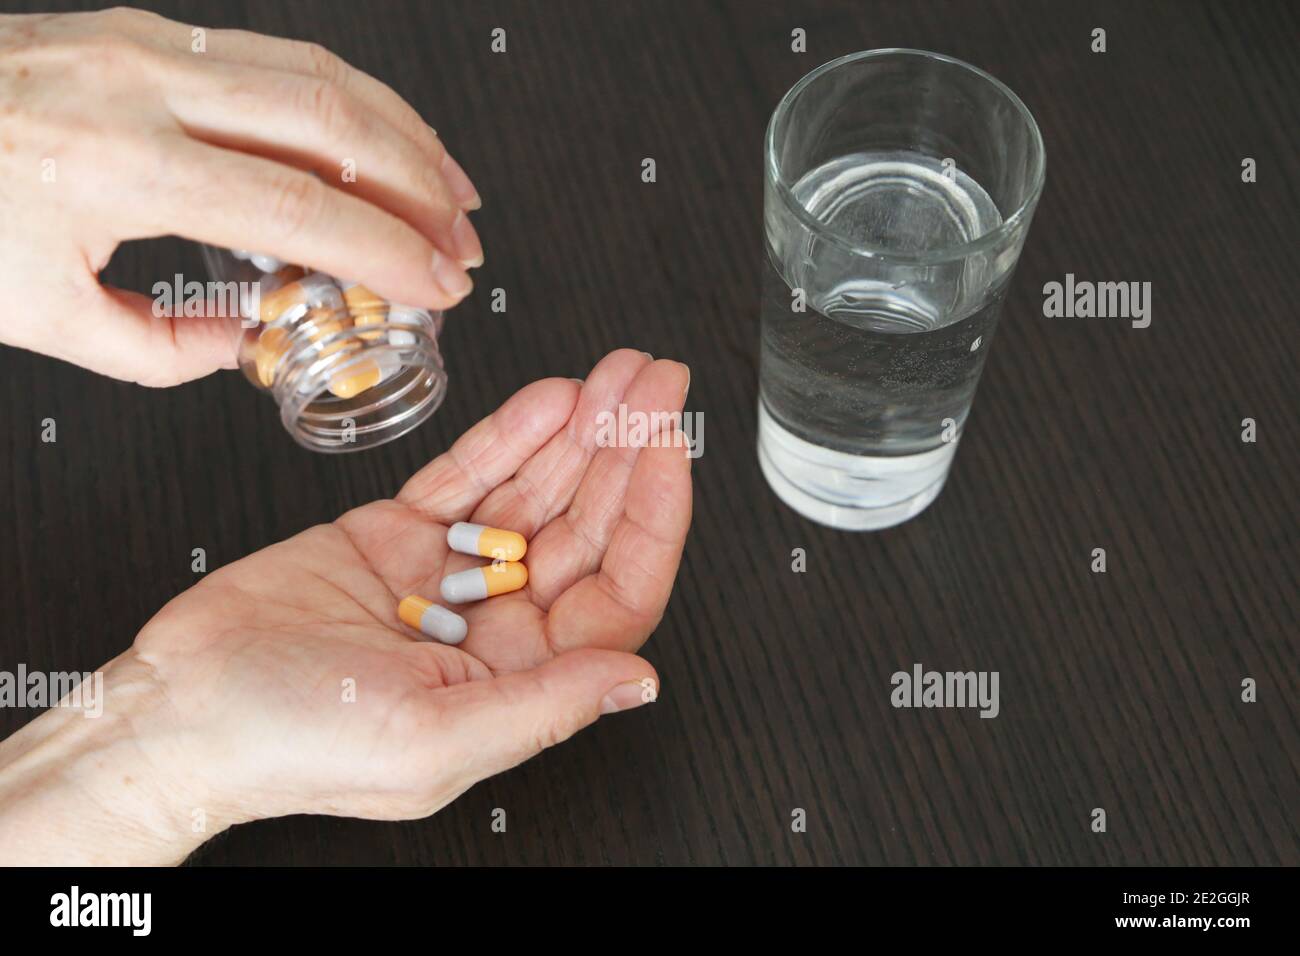 Woman with pills in hands. Medication in capsules and glass of water on a table Stock Photo